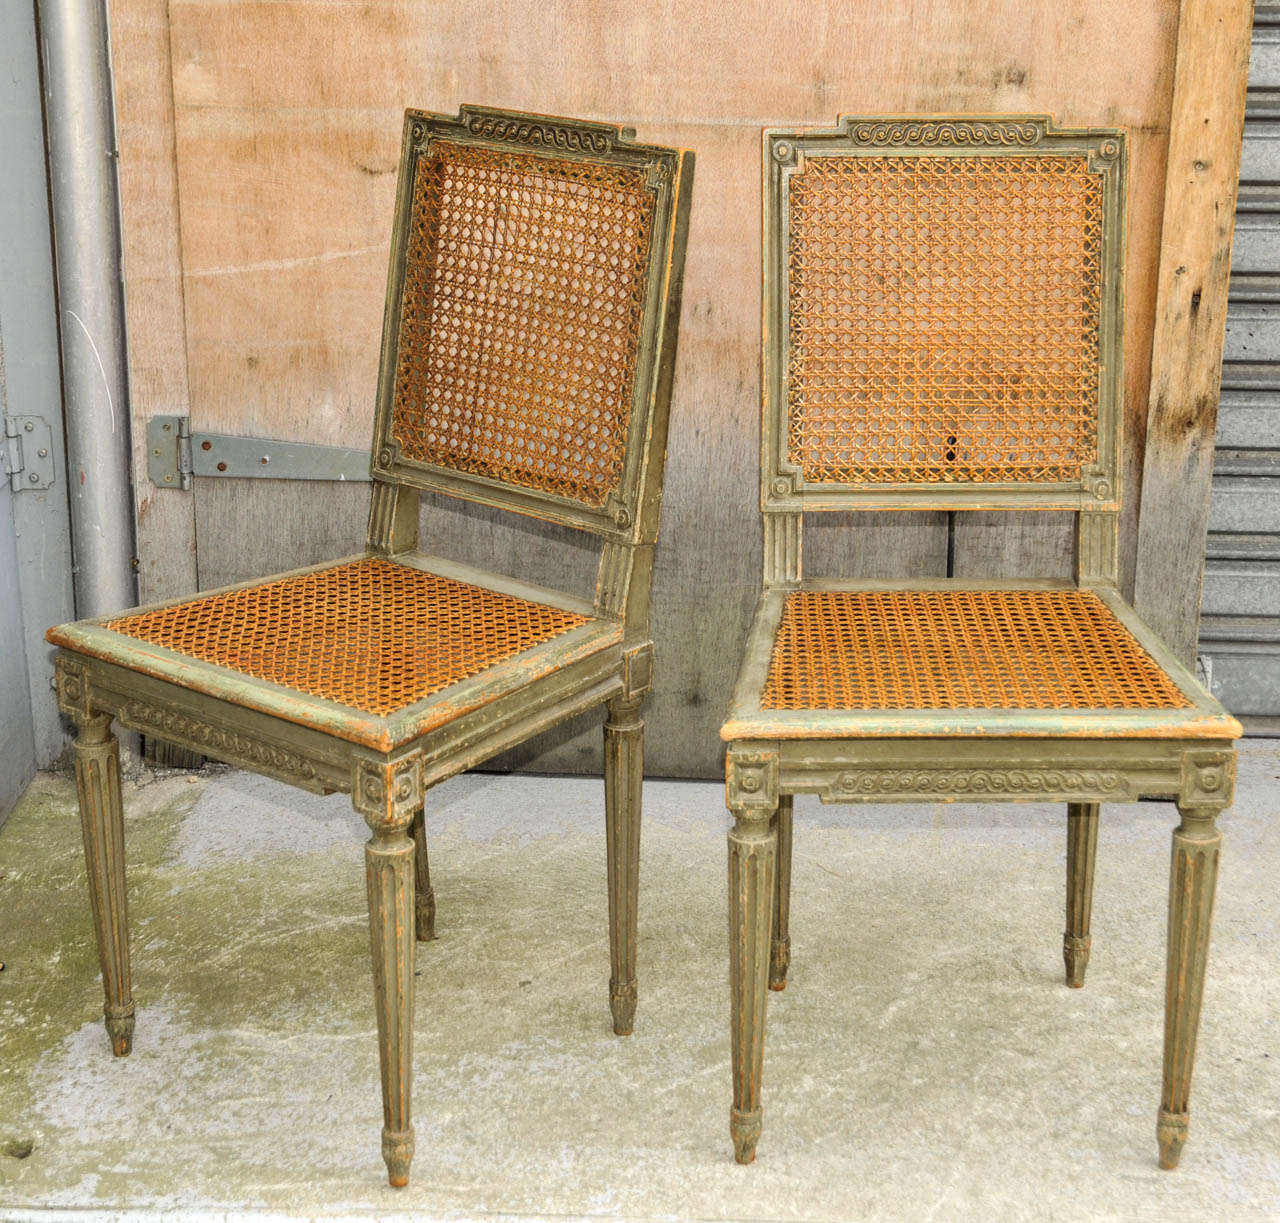 Set of eight 1960's Louis XVI style chairs. Beech tree with old green patina and cane work. Worn patina. Good condition. Normal wear consistent with age and use.